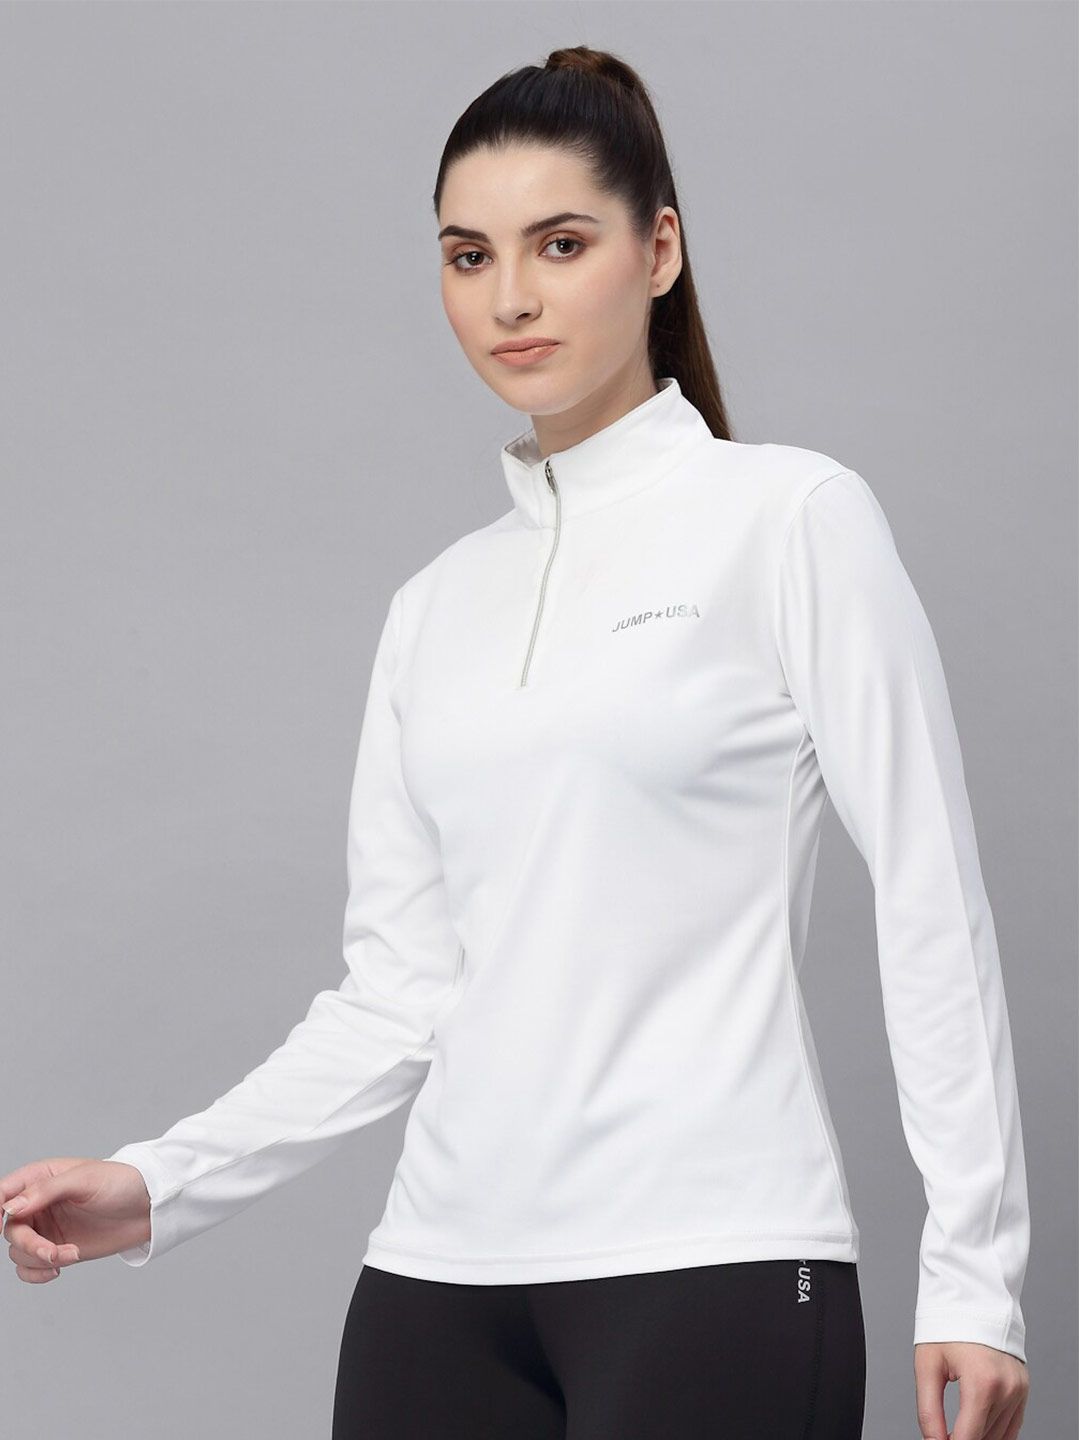 JUMP USA Women White High Neck Rapid Dry T-shirt Price in India